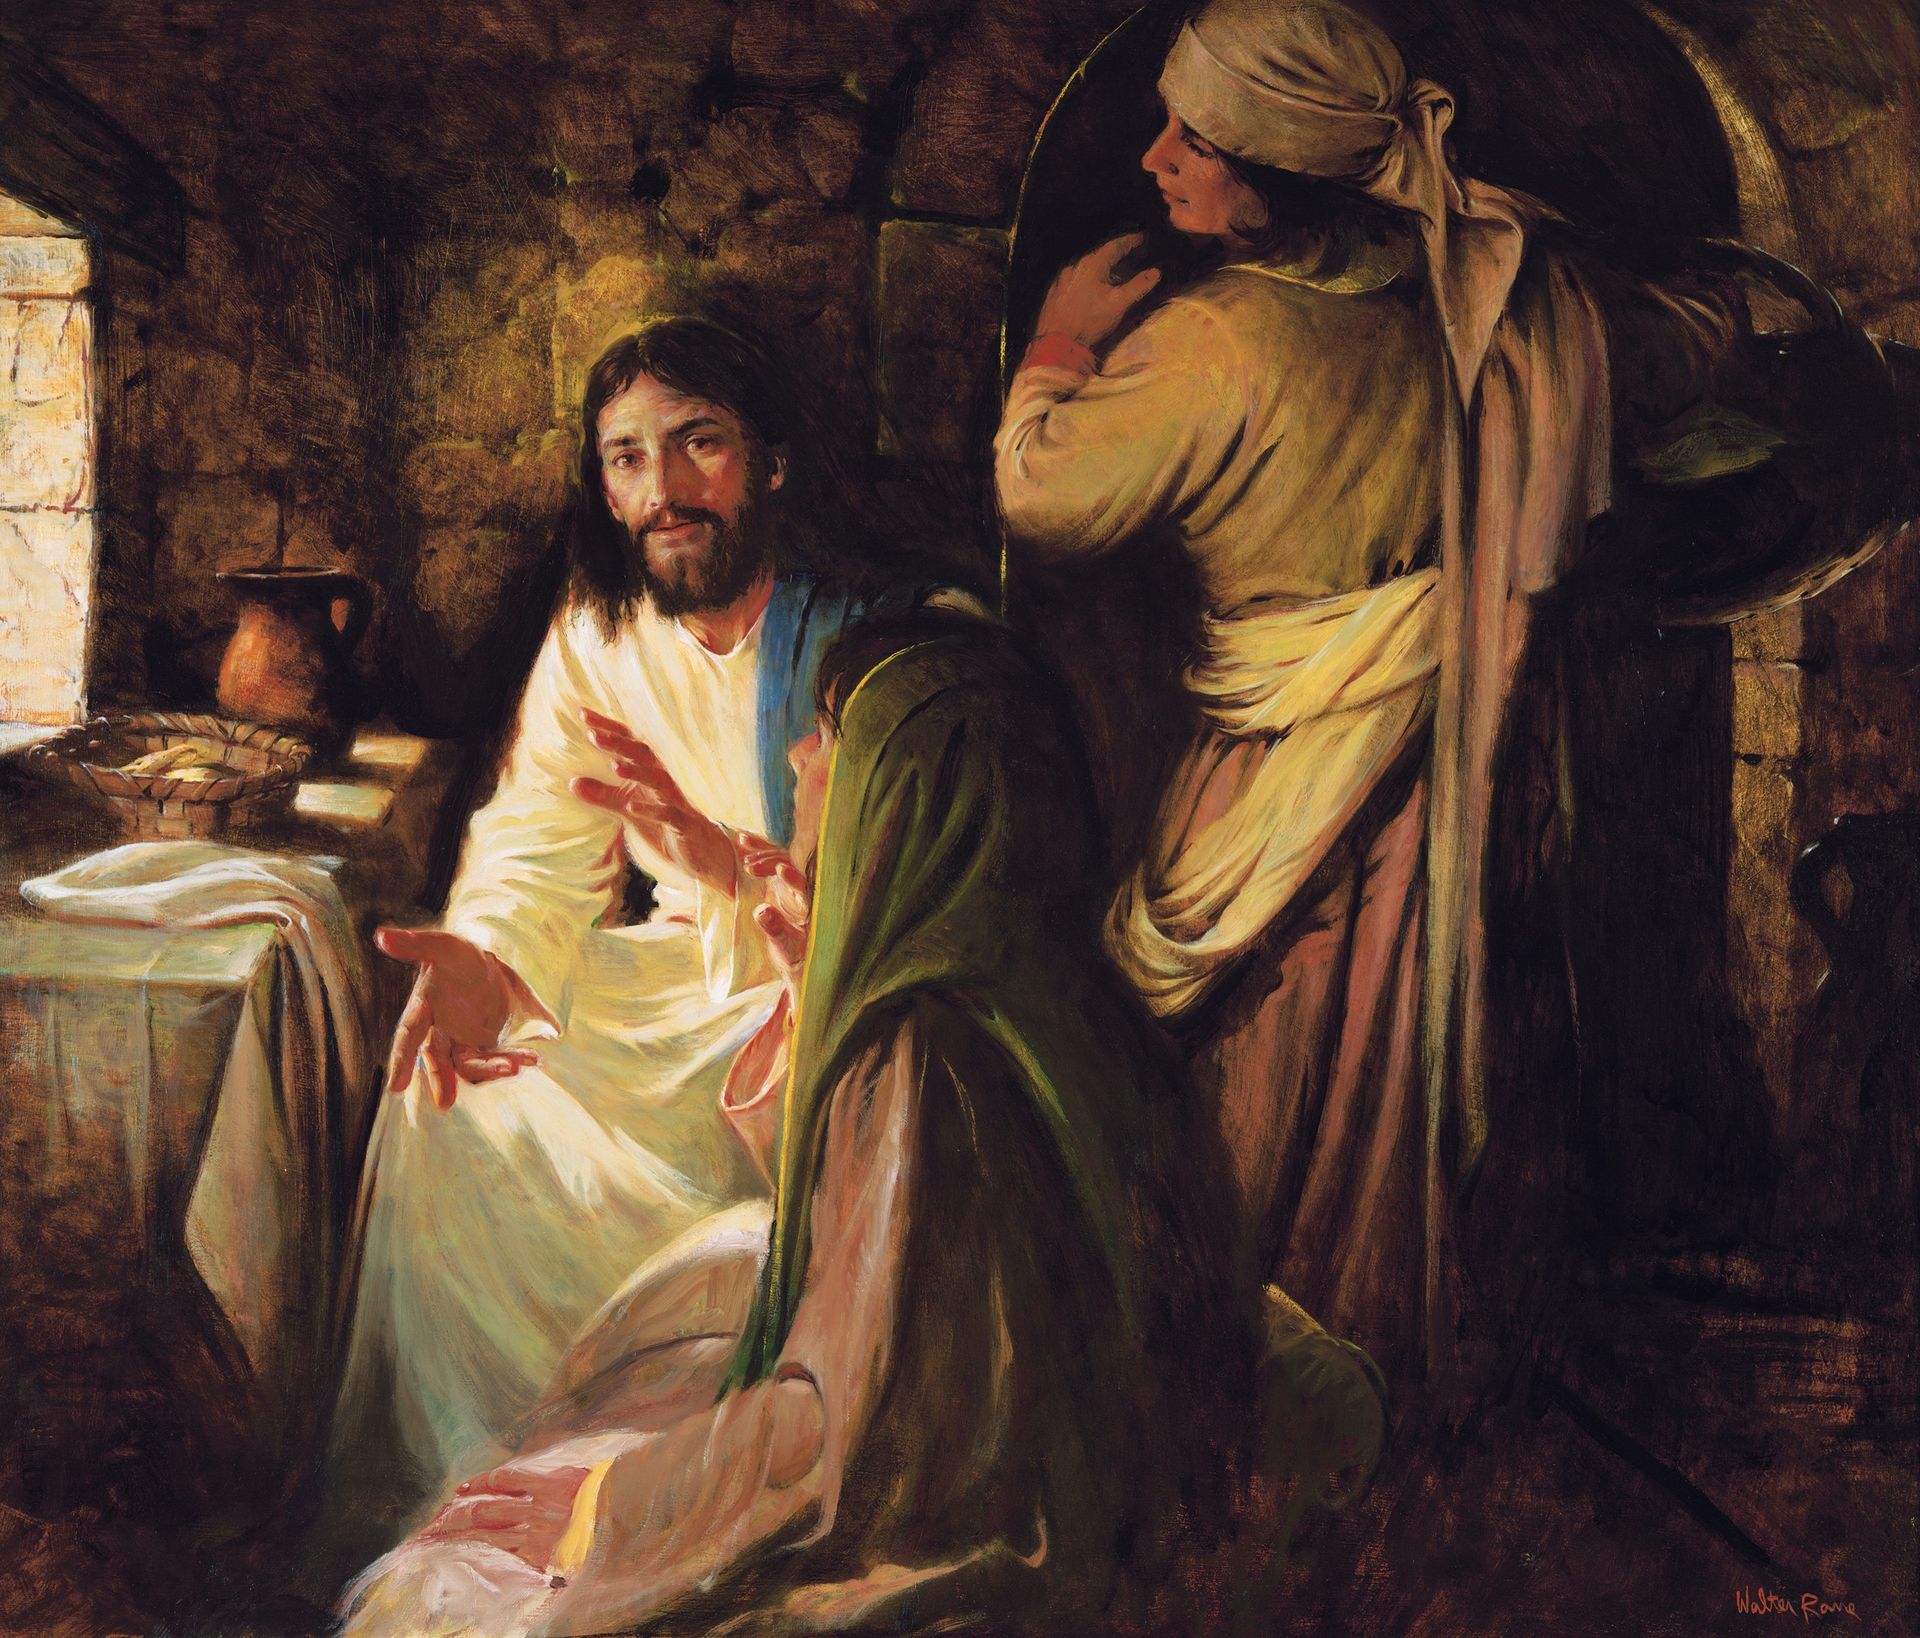 Christ in the Home of Mary and Martha, by Walter Rane.